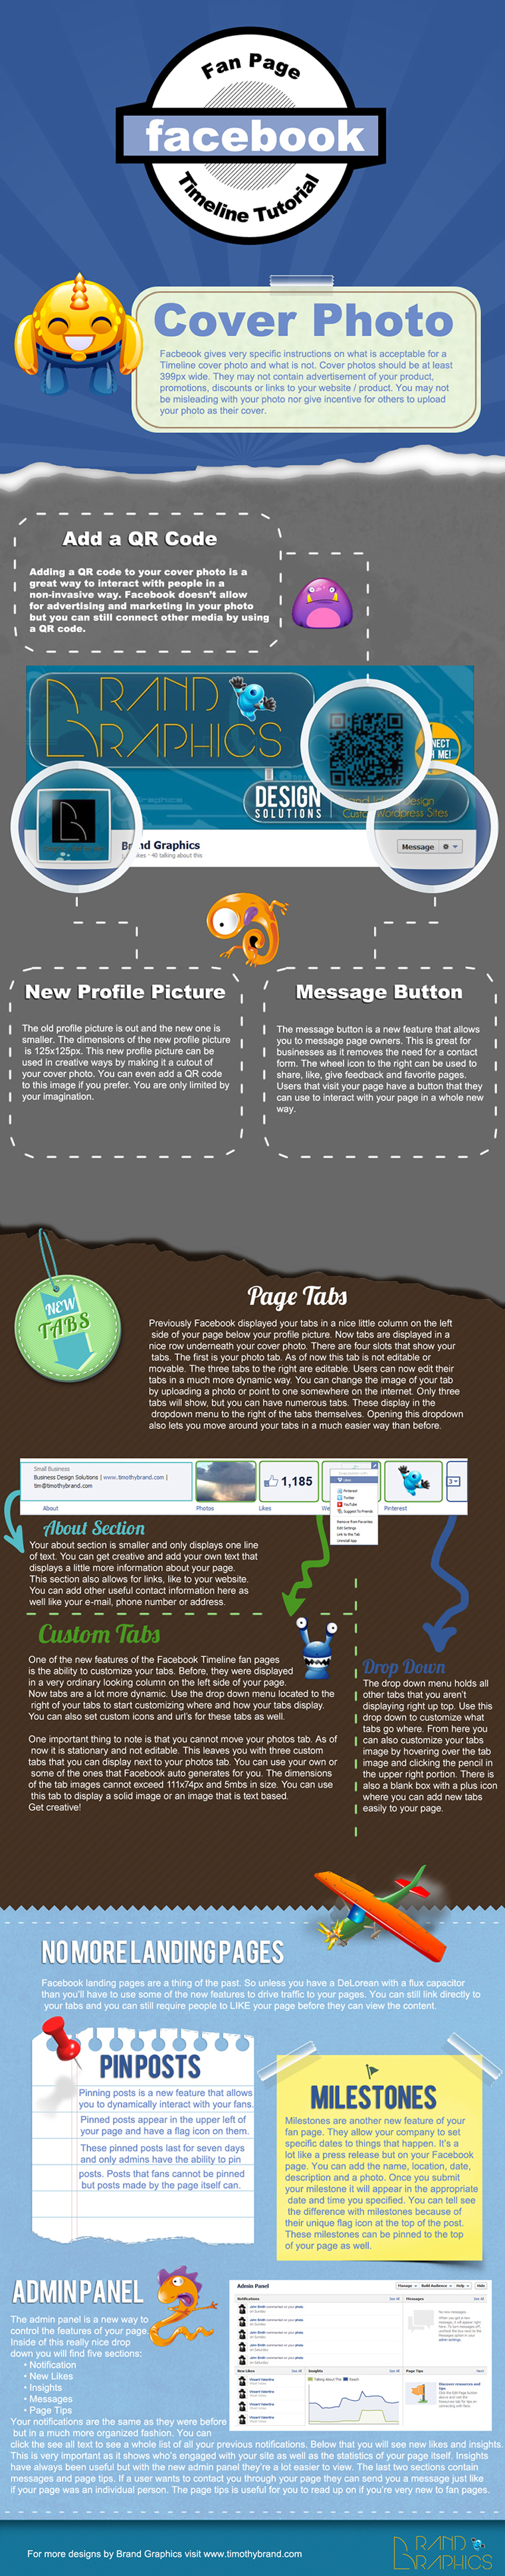 Facebook-Fan-Page-Timeline-Tutorial-infographic